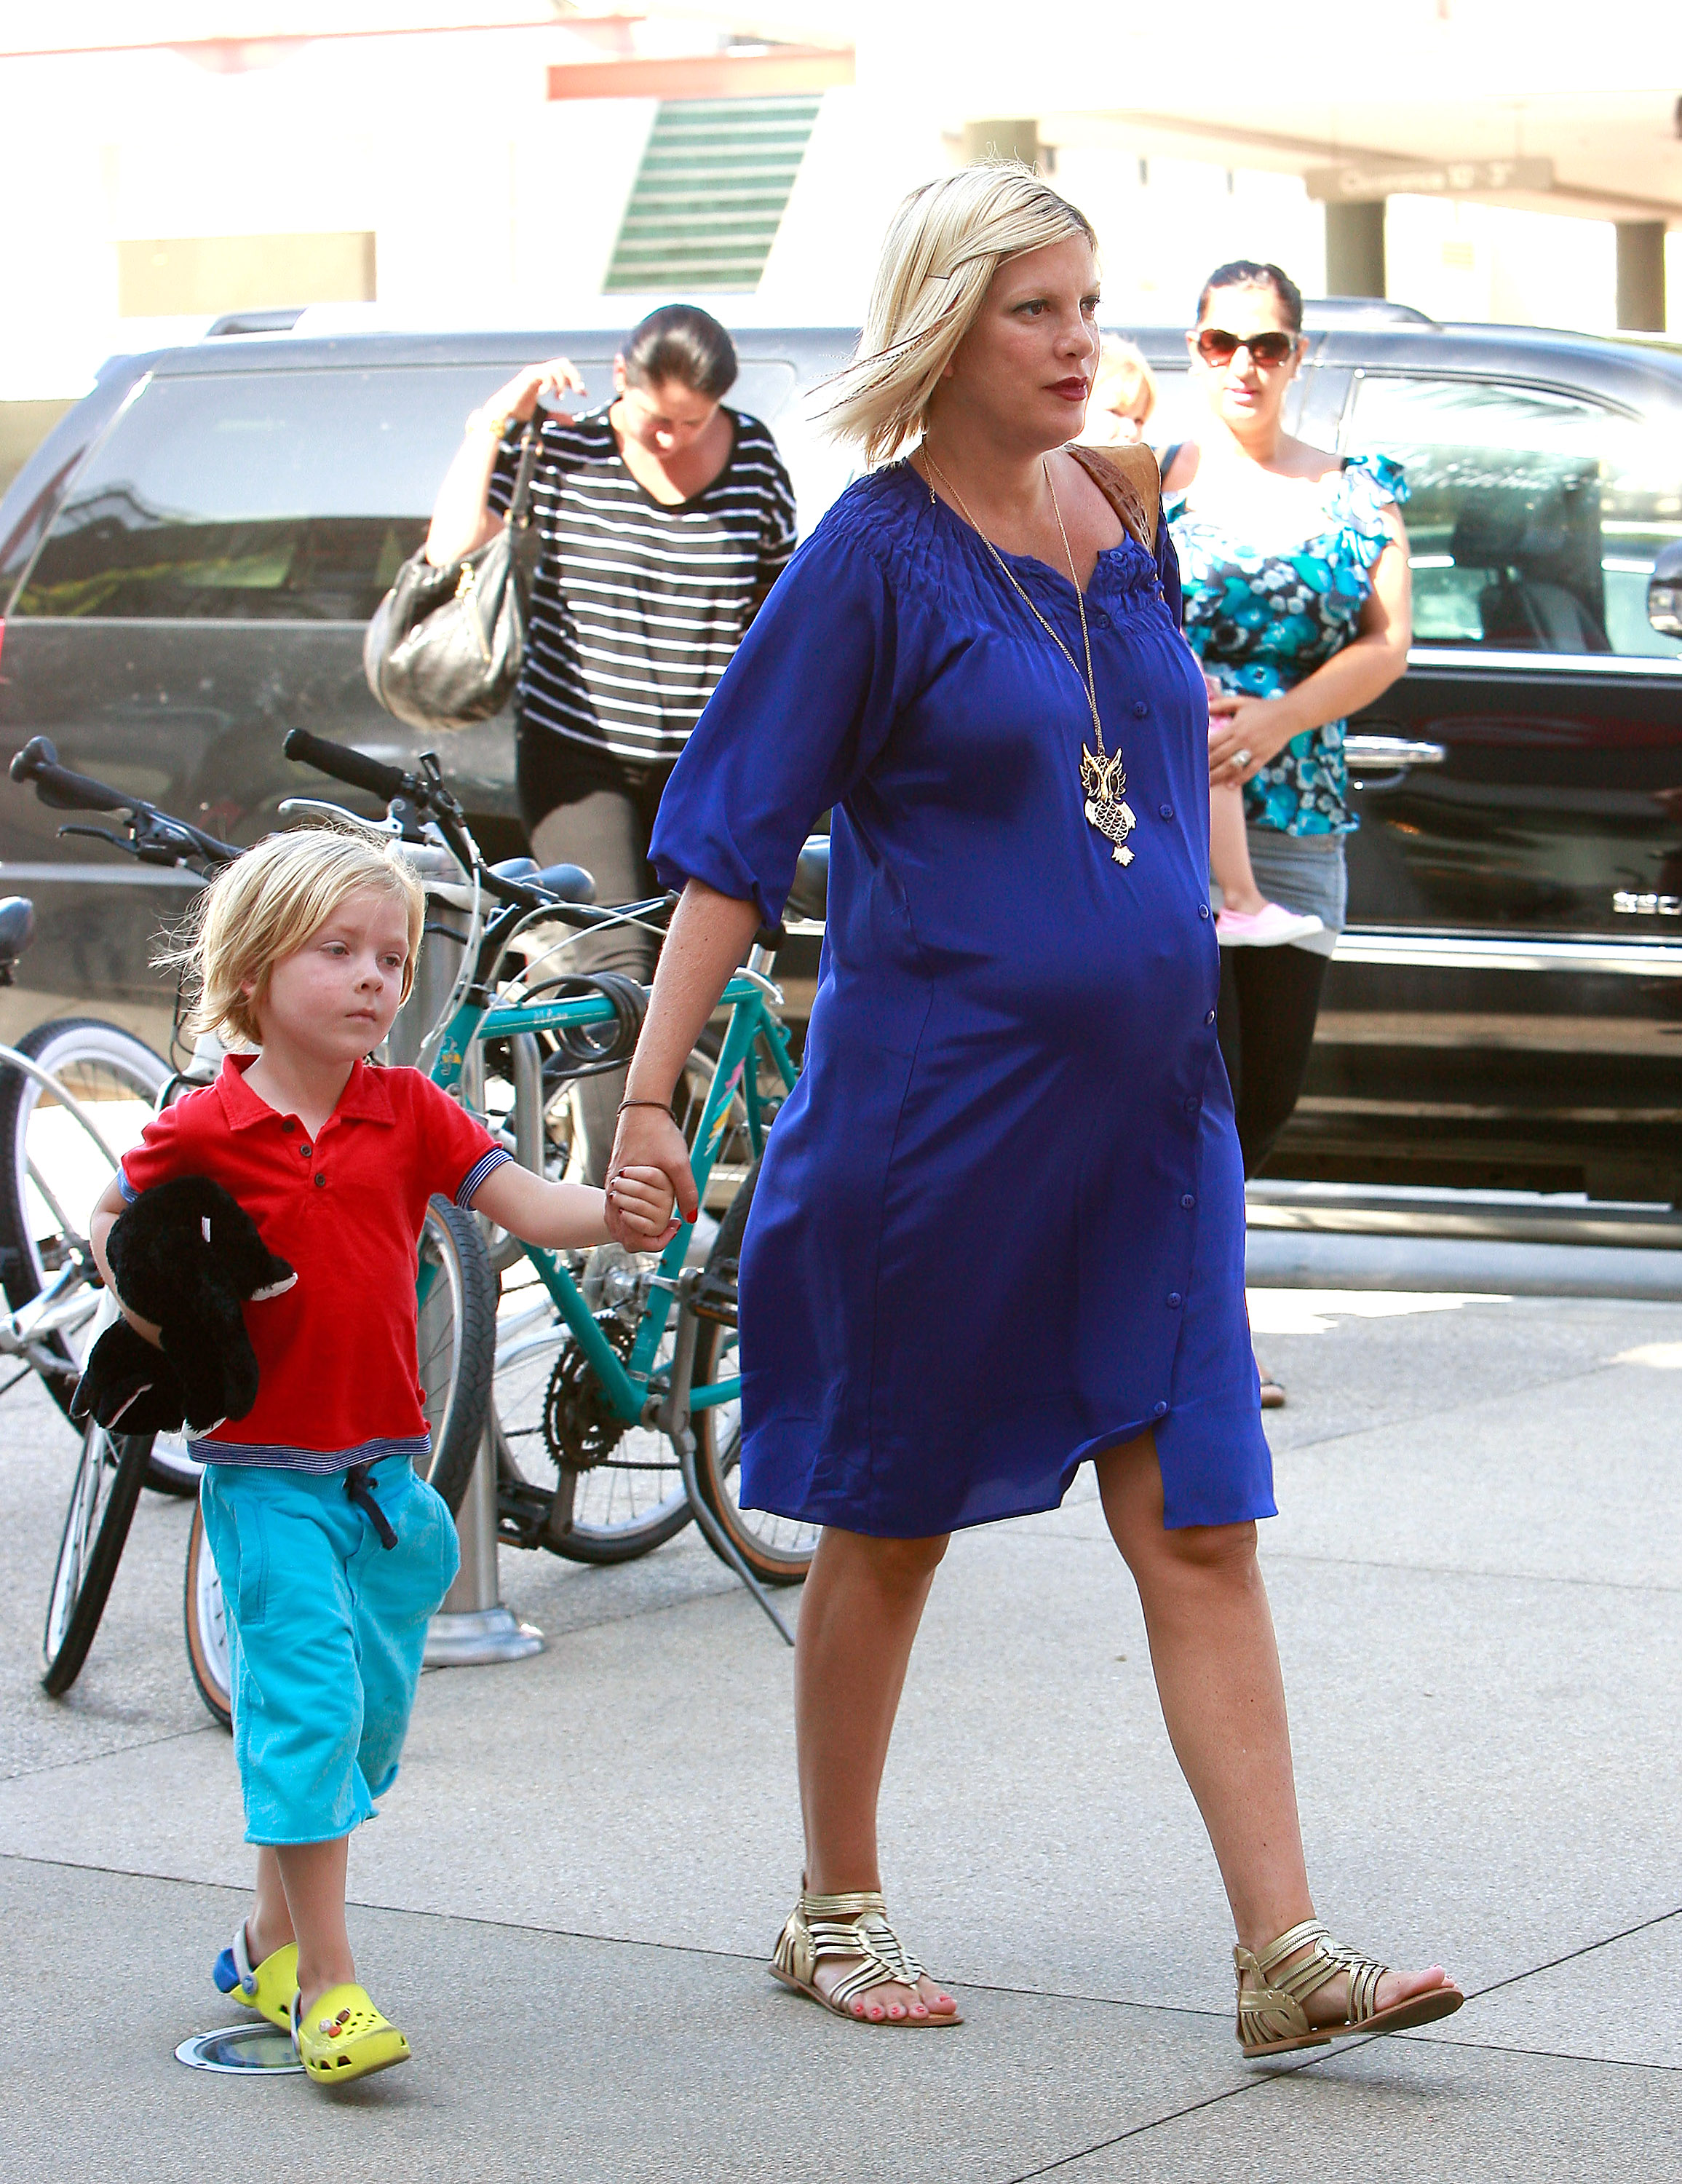 Liam McDermott and Tori Spelling spotted in Los Angeles, California on August 30, 2011 | Source: Getty Images